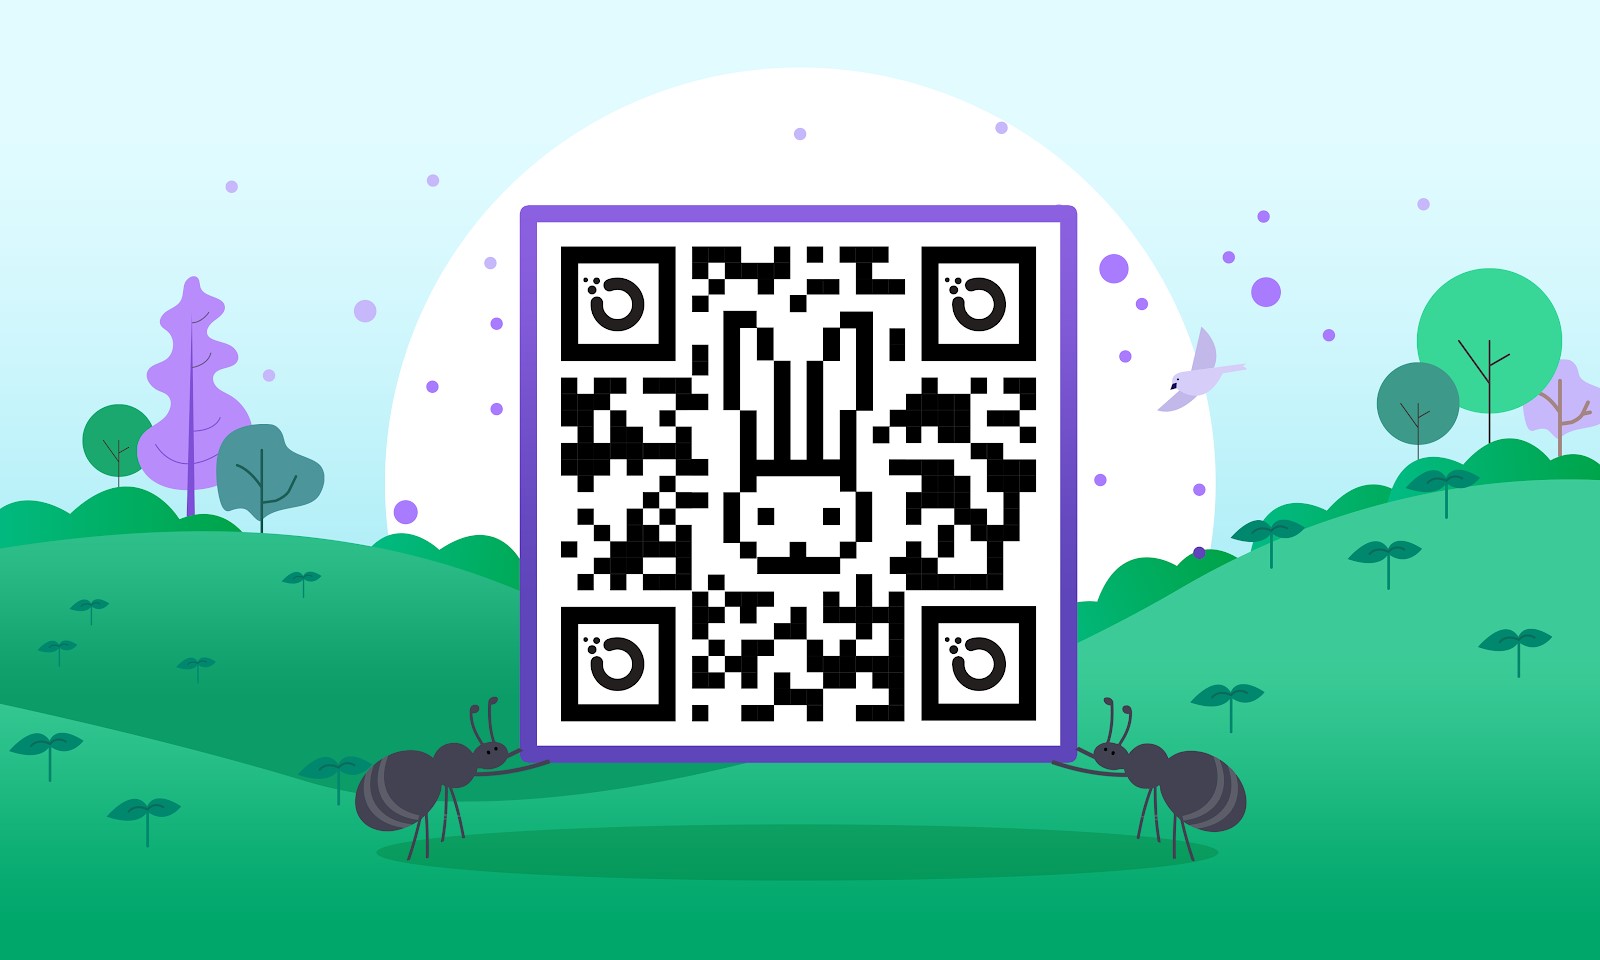 Get hopping faster: Making privacy easier with QR codes